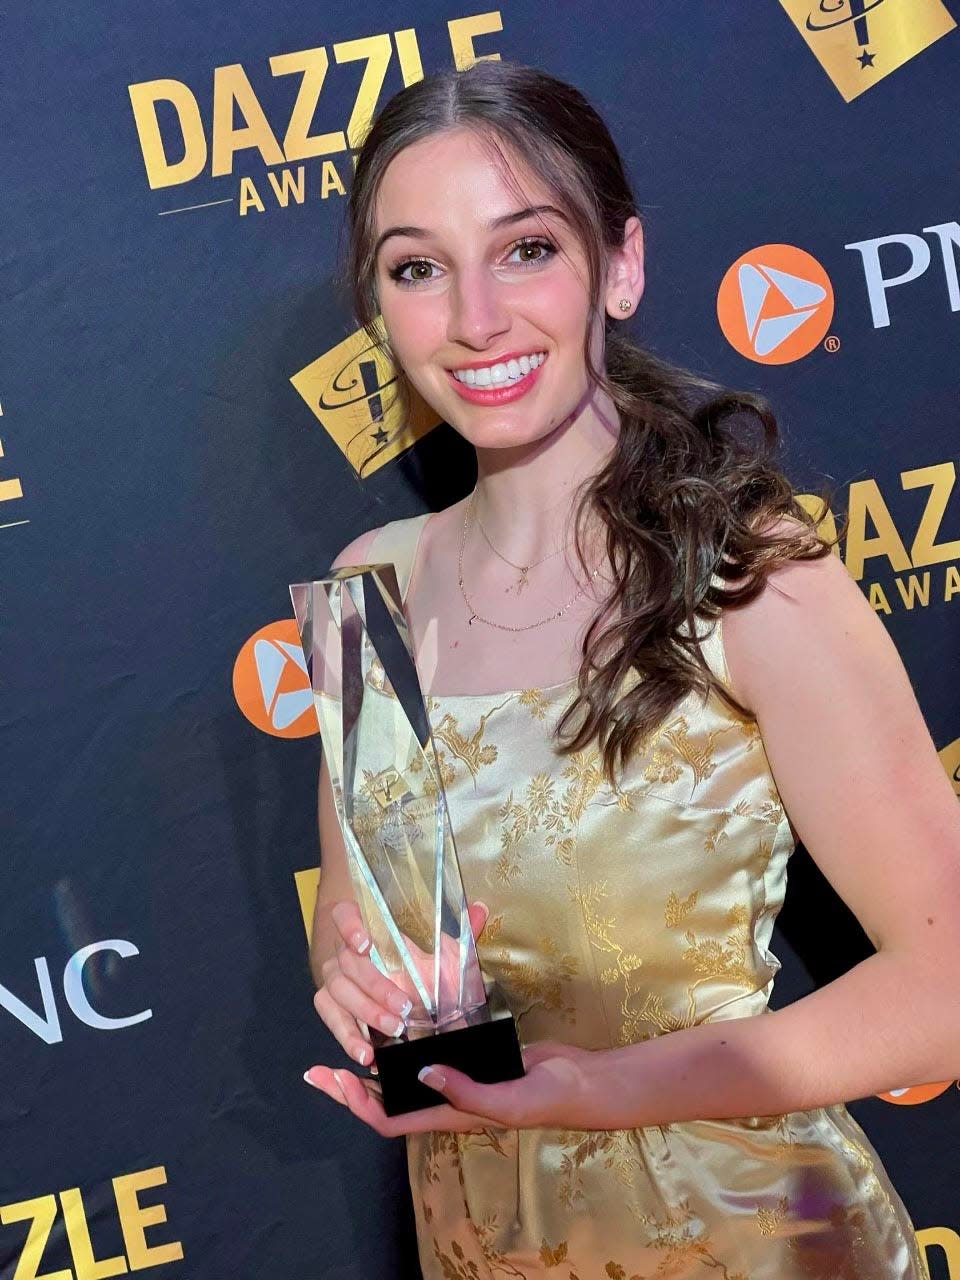 Julia Martin of Hoban High School won best supporting actress at the Playhouse Square Dazzle Awards.